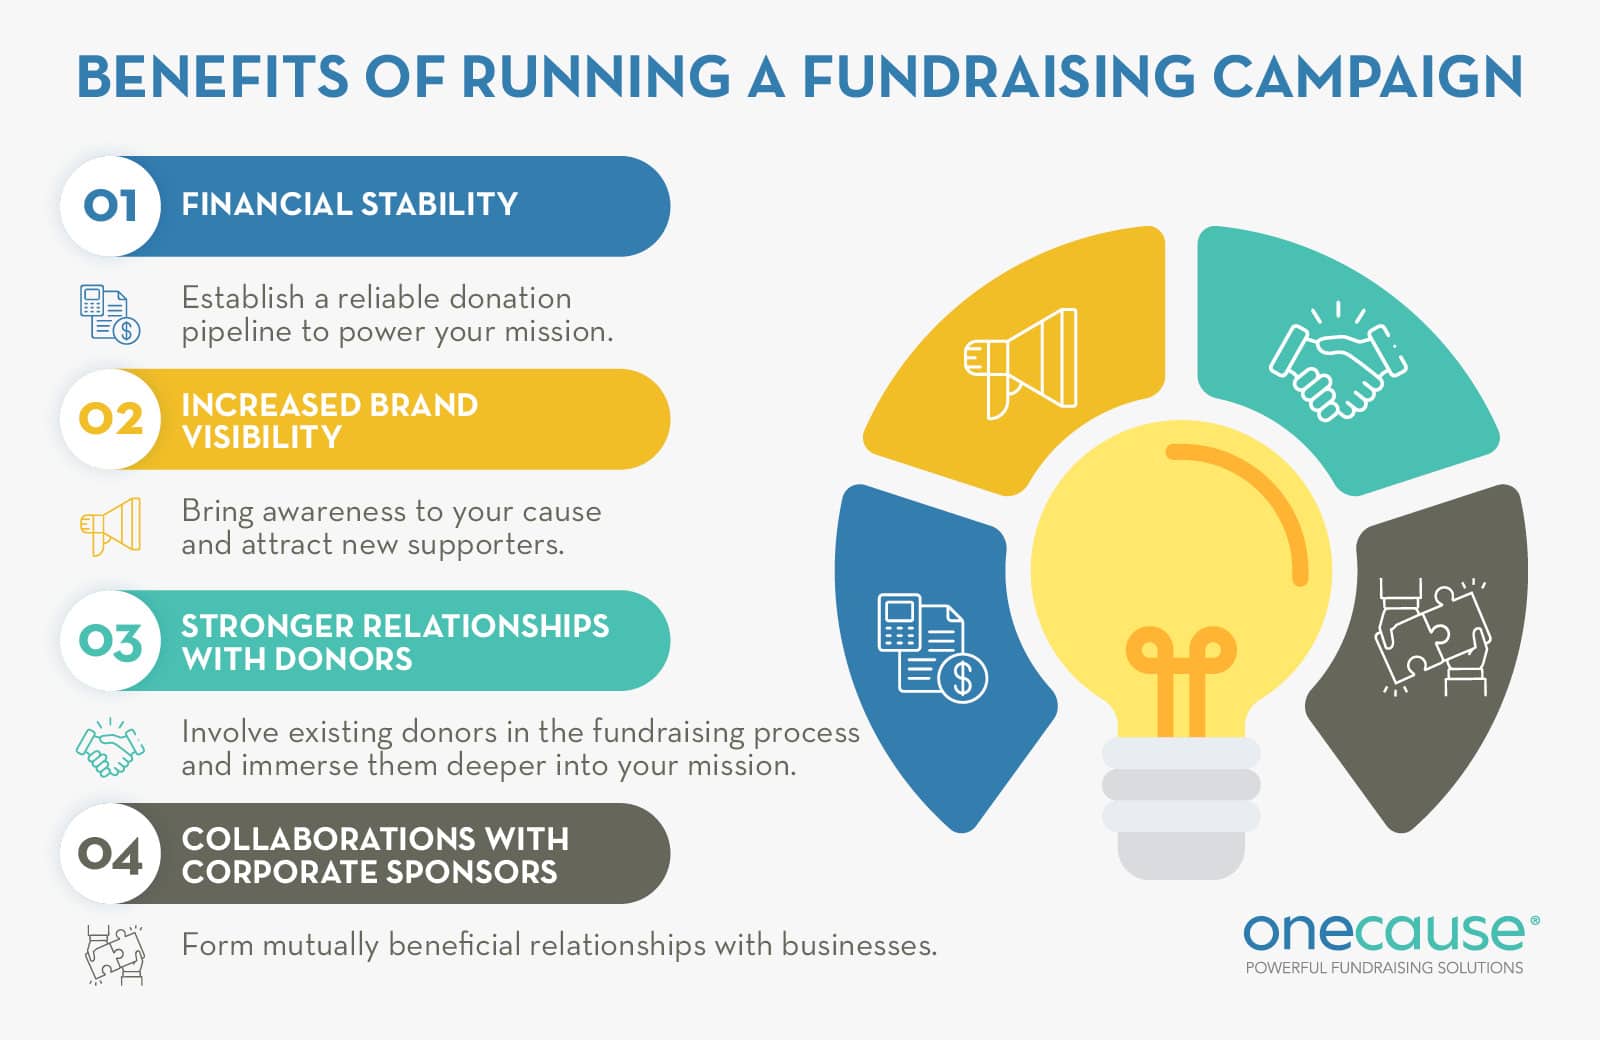 Fundraising campaigns can bring a number of benefits to your nonprofit and advance your mission.